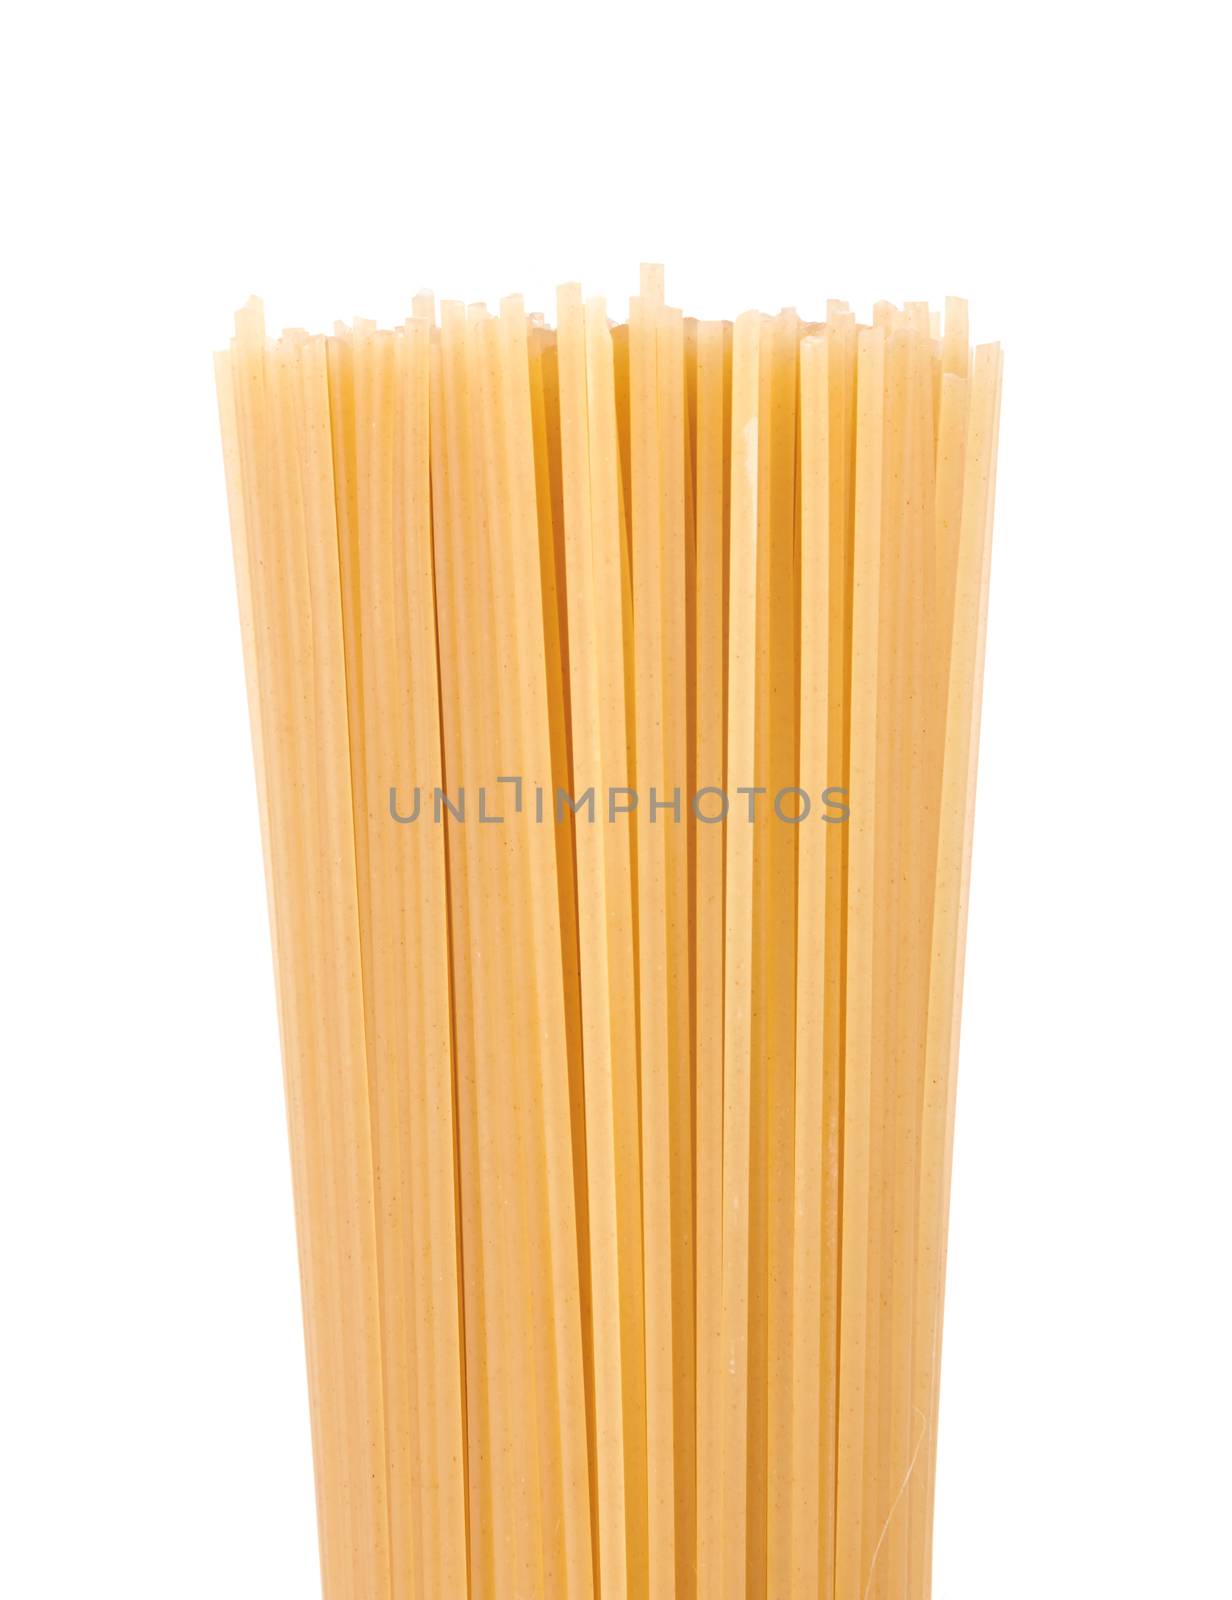 raw spaghetti isolated on a white background 